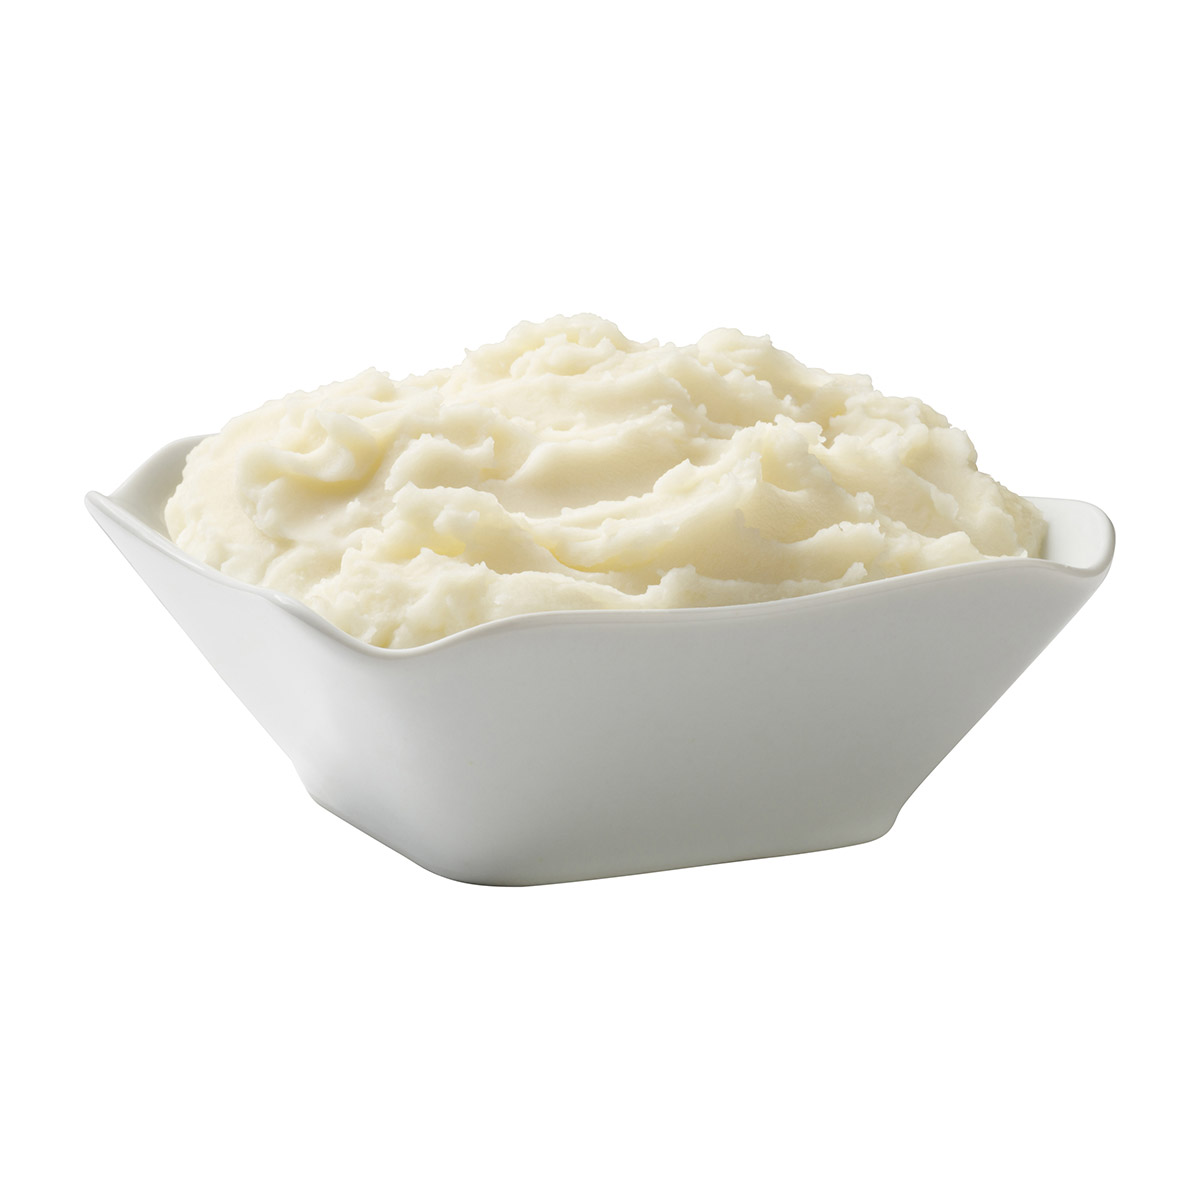 pictures of mashed potatoes plain clip art